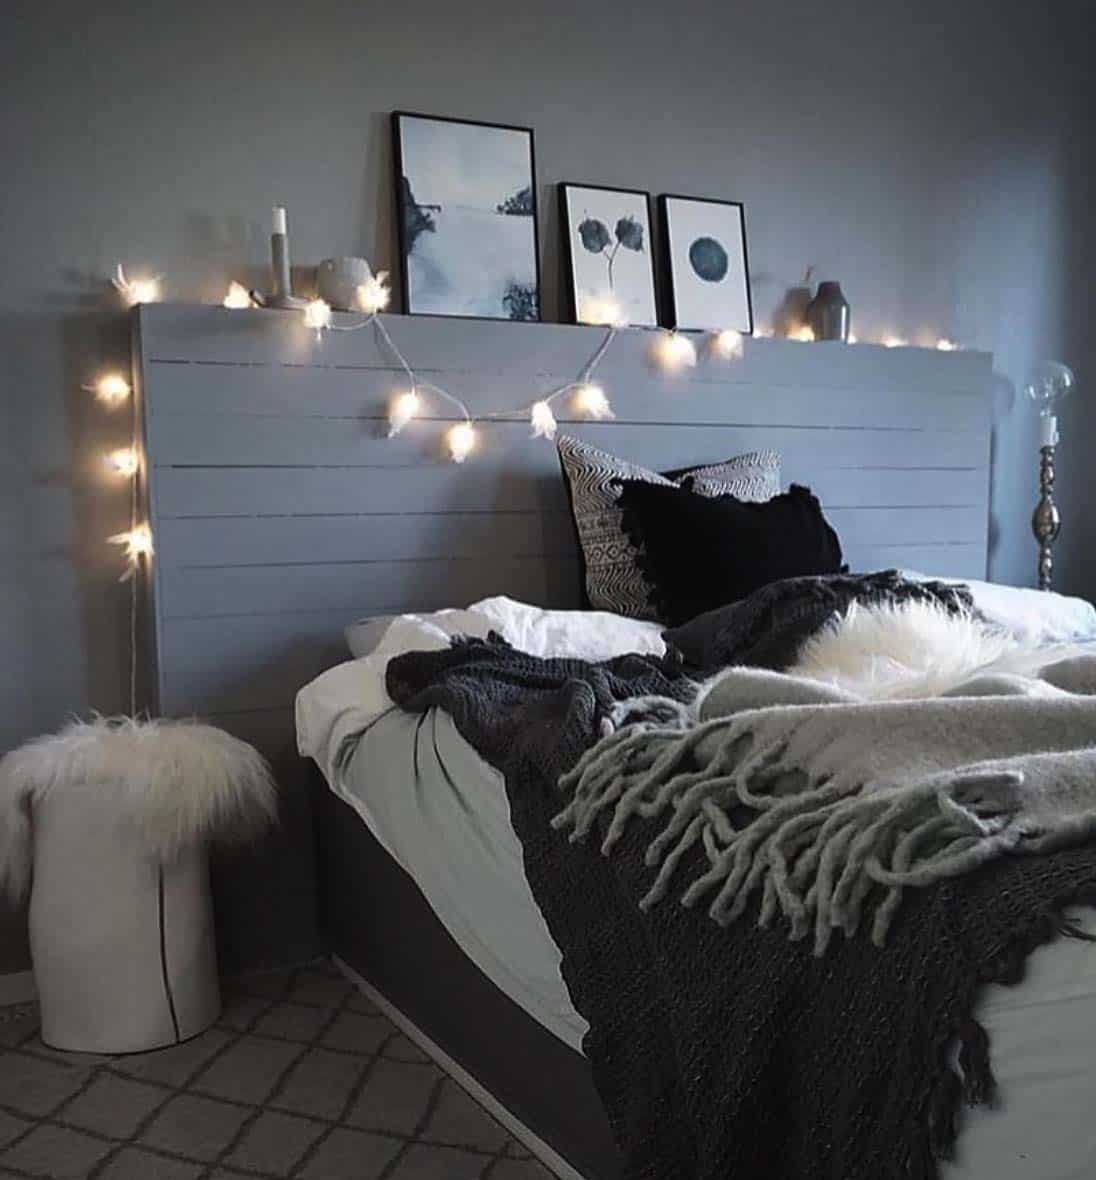 Cozy Bedroom Decorating Ideas For Winter-26-1 Kindesign